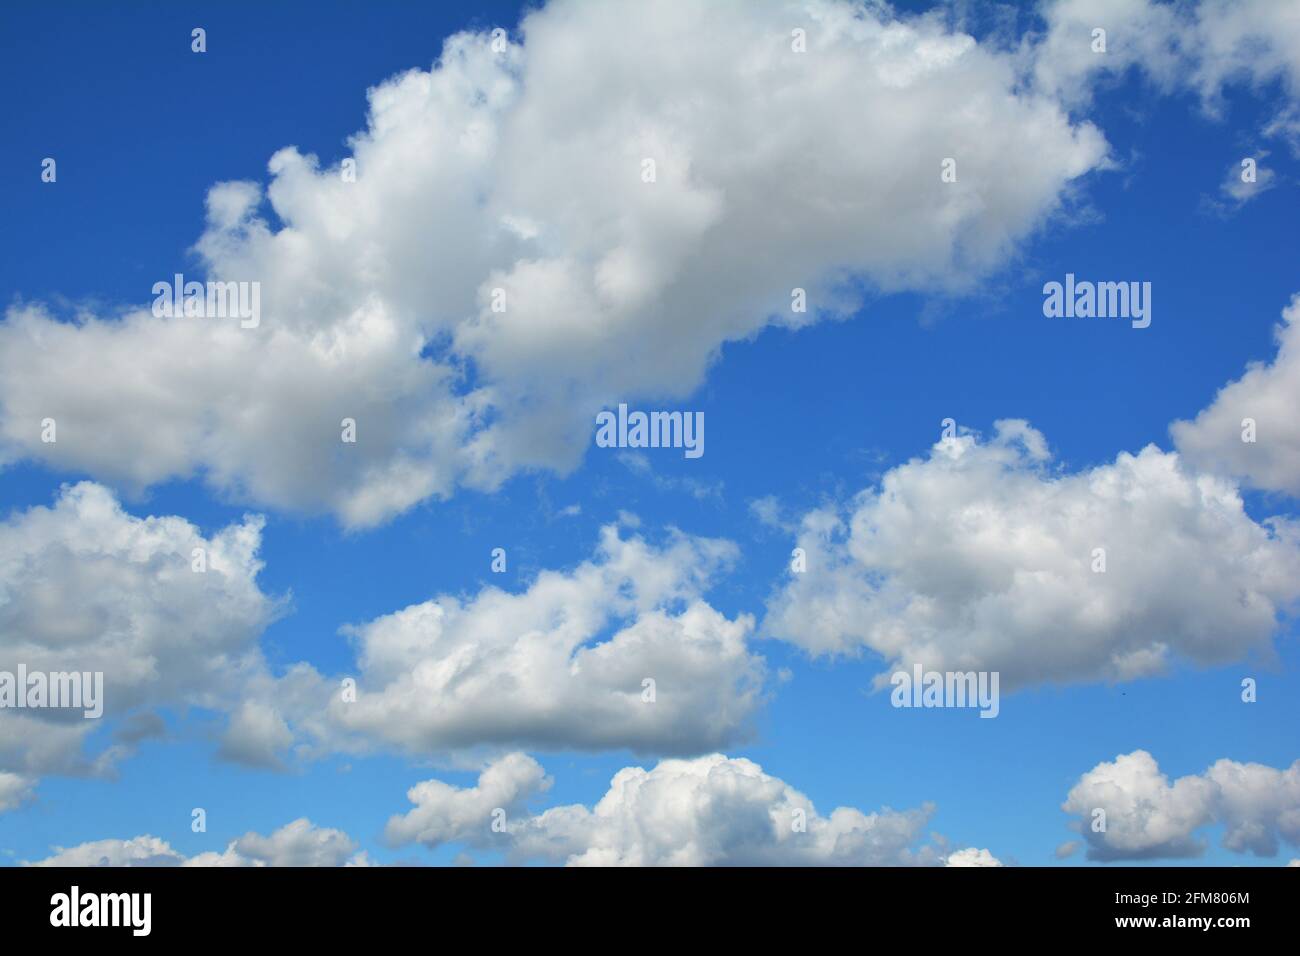 The blue sky with white clouds background.  White cumulus clouds in a blue sky. Stock Photo